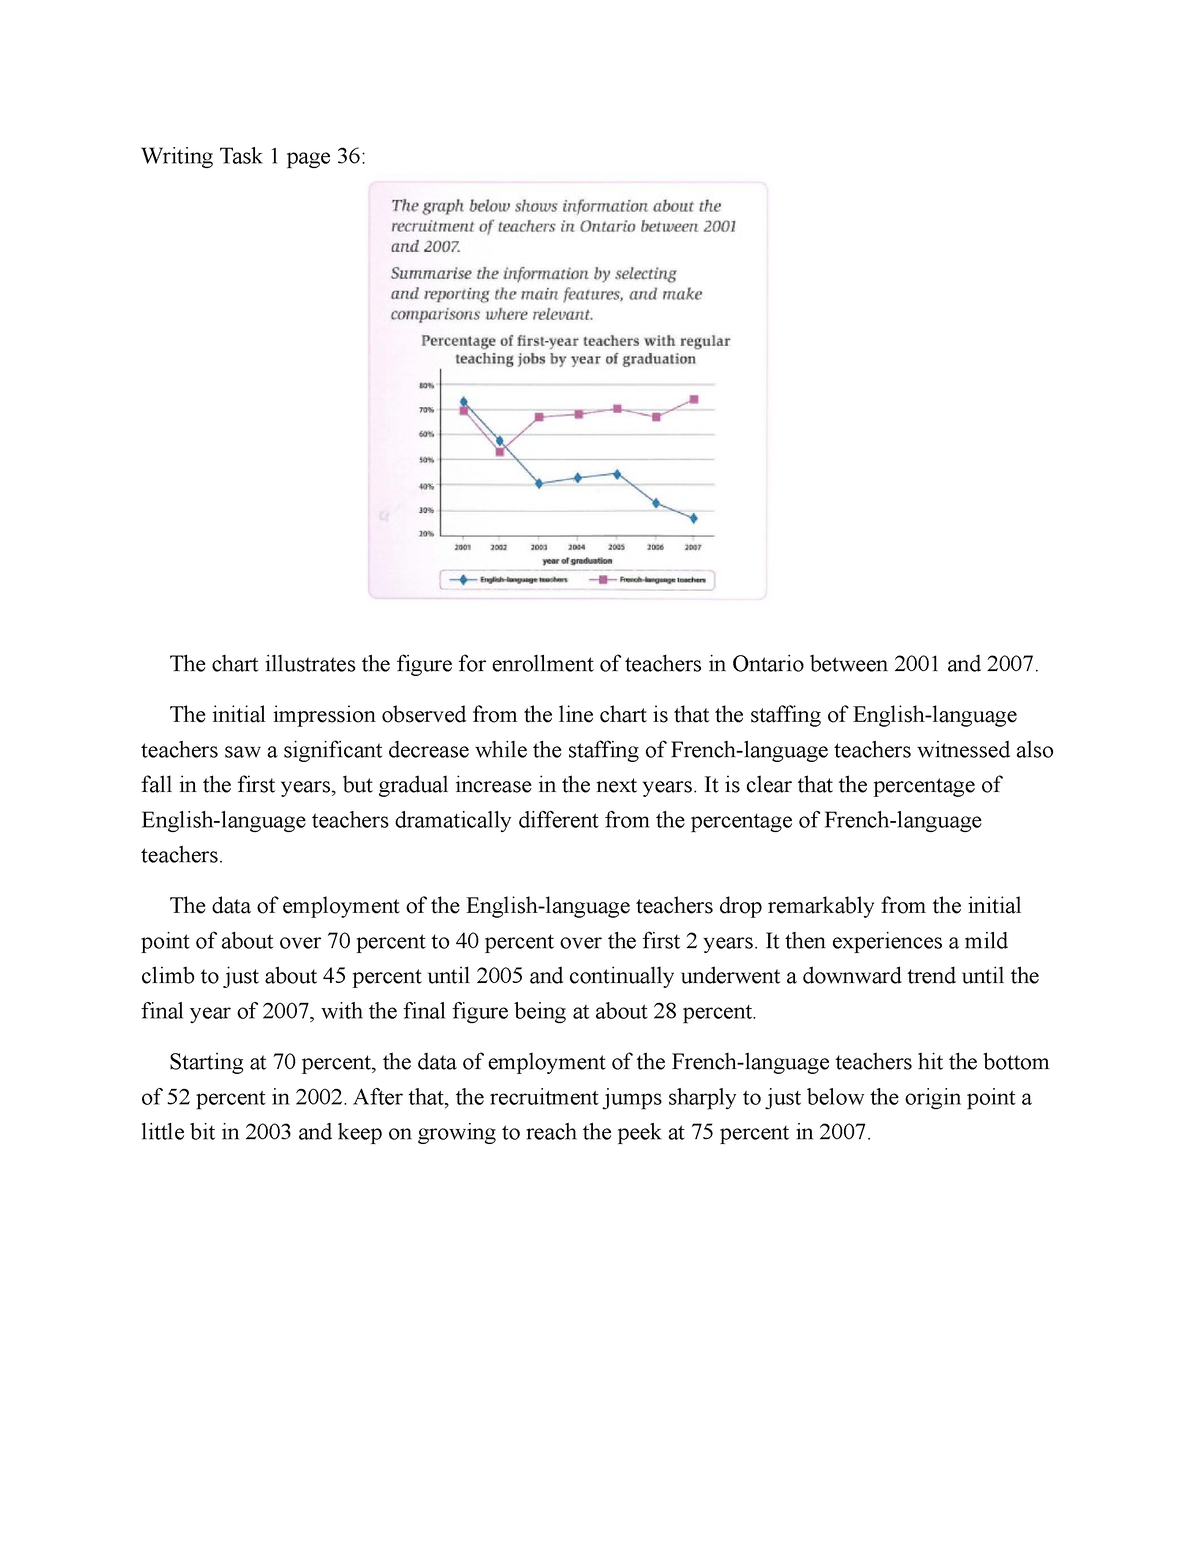 Writing Task1 page 36 - Writing Task 1 page 36: The chart illustrates ...